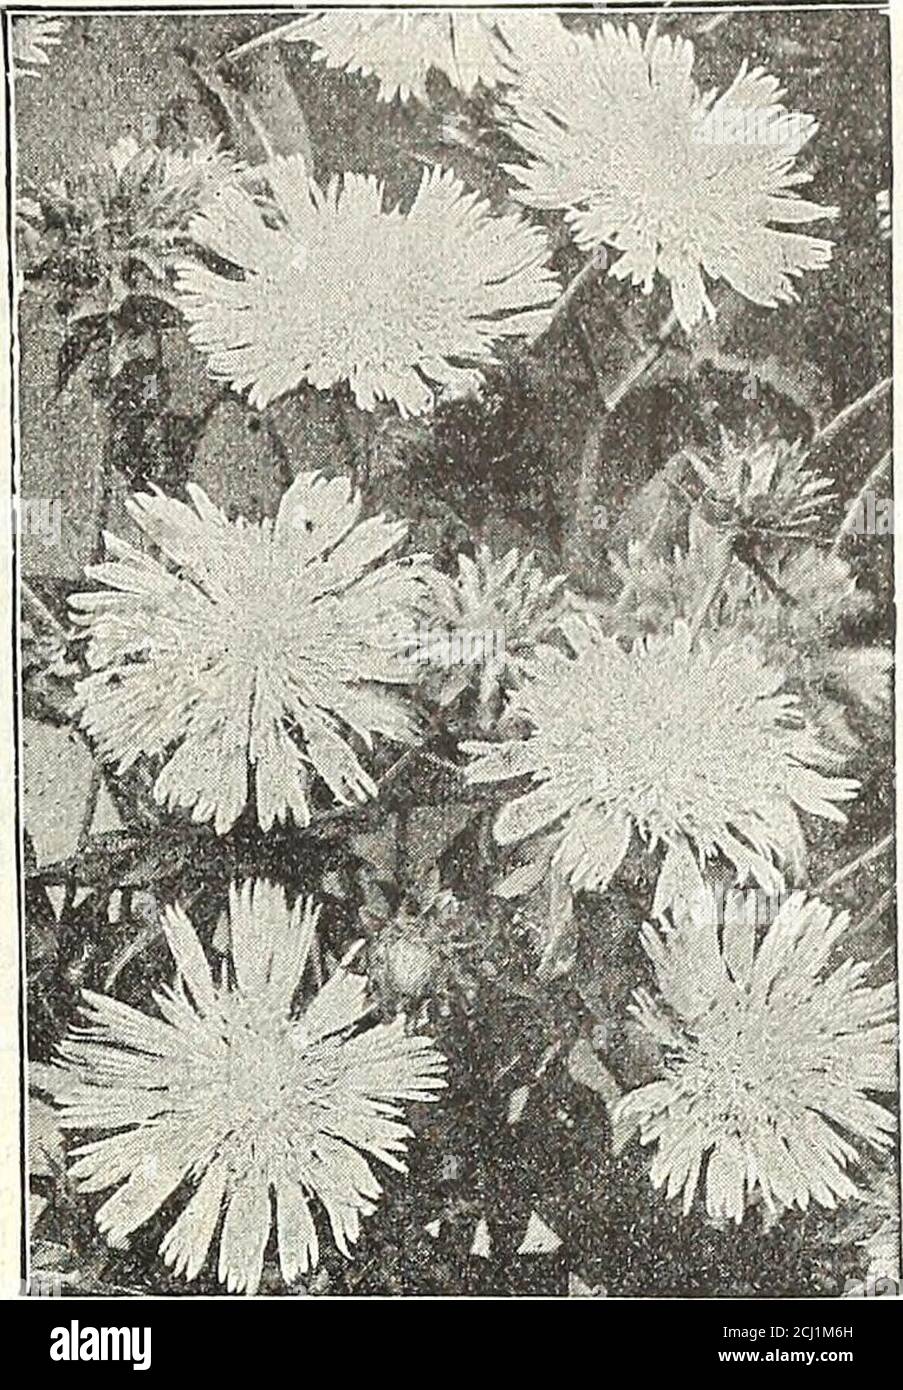 . Dreer's autumn 1904 catalogue . ve yellow flowers in Sept.; 4 ft.Rhexia Virginica (Meadoio Beauty). A handsome dwarf plant, rosy-purple blossoms in summer.Salvia Azurea Grandiflora (Meadow Sage). Sky-blue flowers in great profusion ; Aug. and Sept.; 3 to 4 ft. Argentea. Large woolly-white foliage; flowers whitish with purple. Pratensis. Spikes of deep blue; June to August; 3 ft. 25 cts. each ; .$2.50 per doz.Saxifraga Crassifolia (Magasea). Large, handsome ever-green foliage, with white or pink flowers in early spring; 1 ft.; six varieties. 25 cts. each; $2.60 per doz.Scabiosa Caucasica. A c Stock Photo